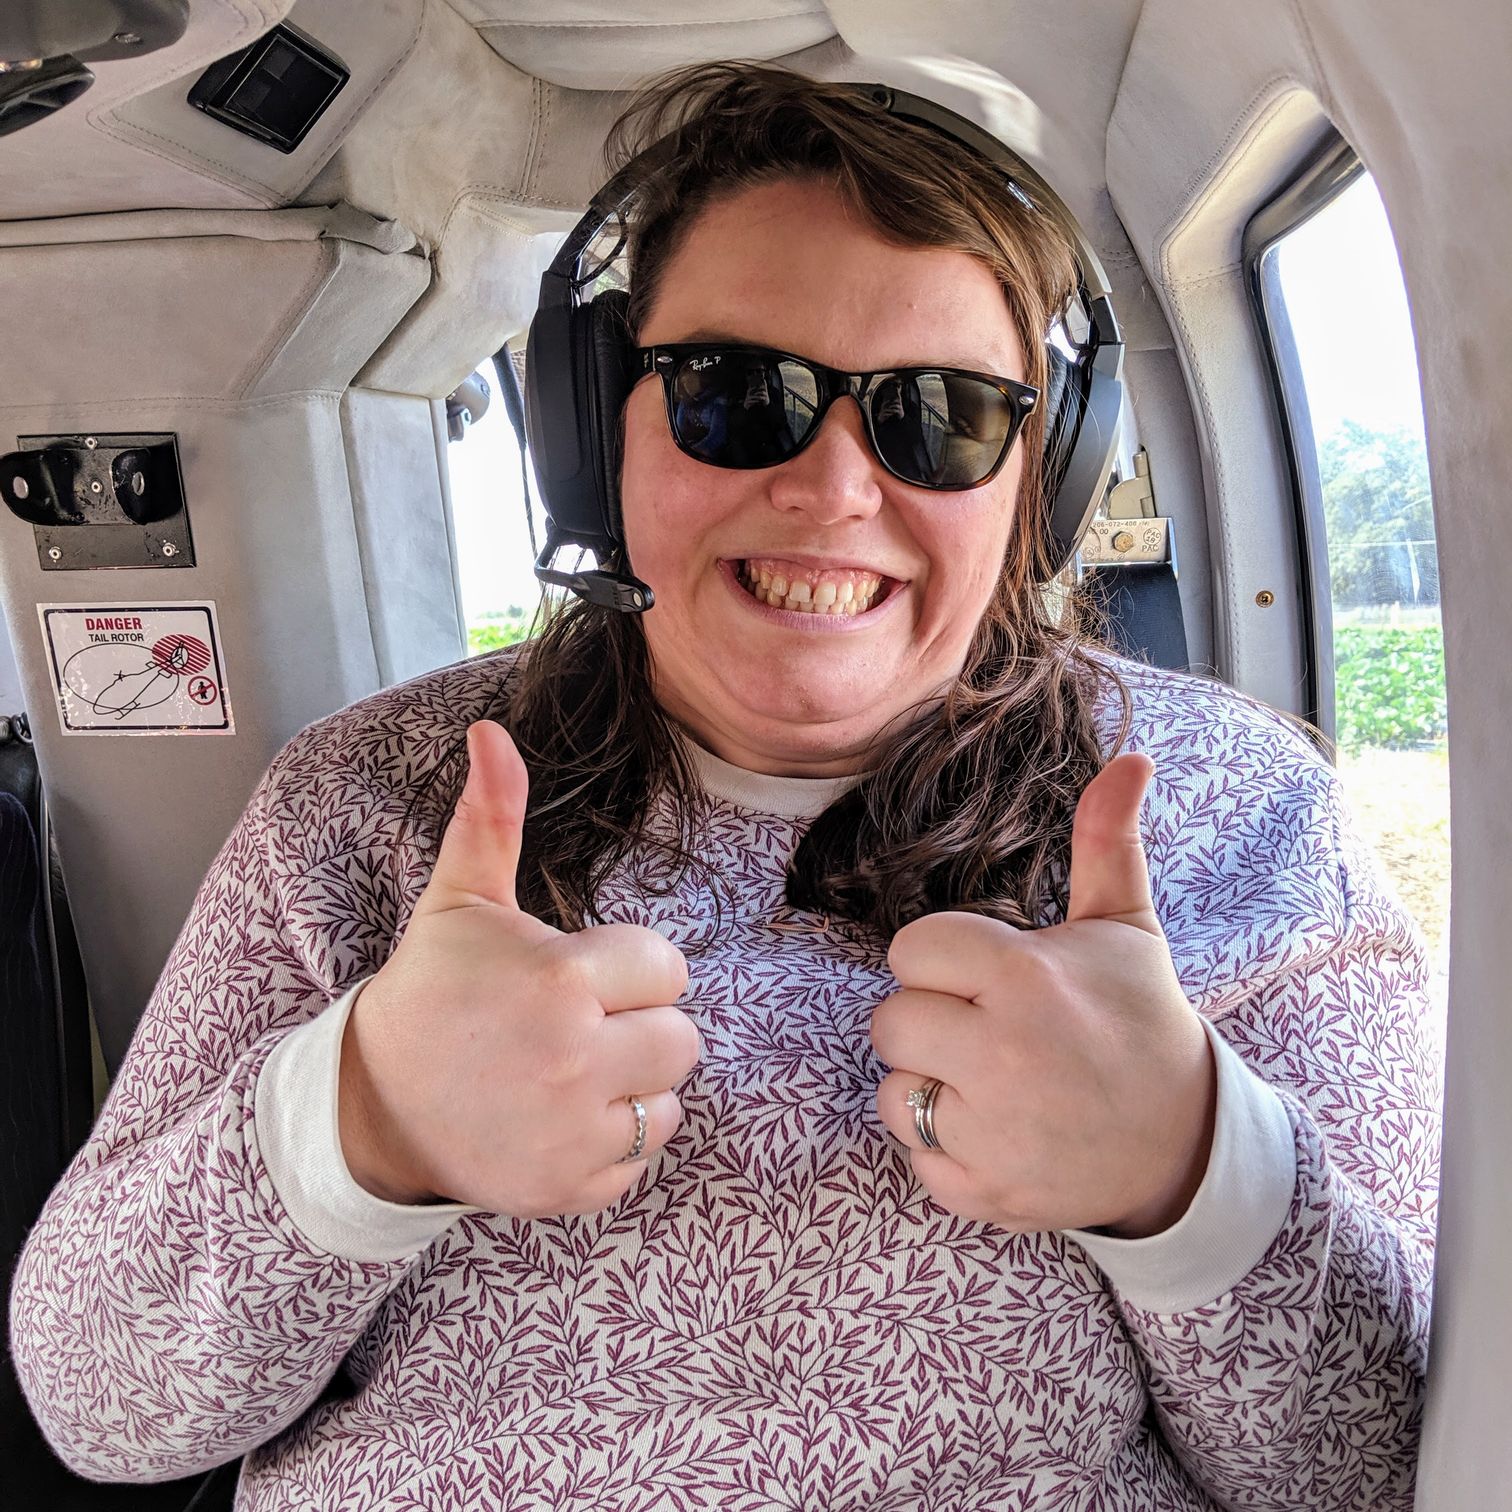 Alex with two thumbs up in the helicopter